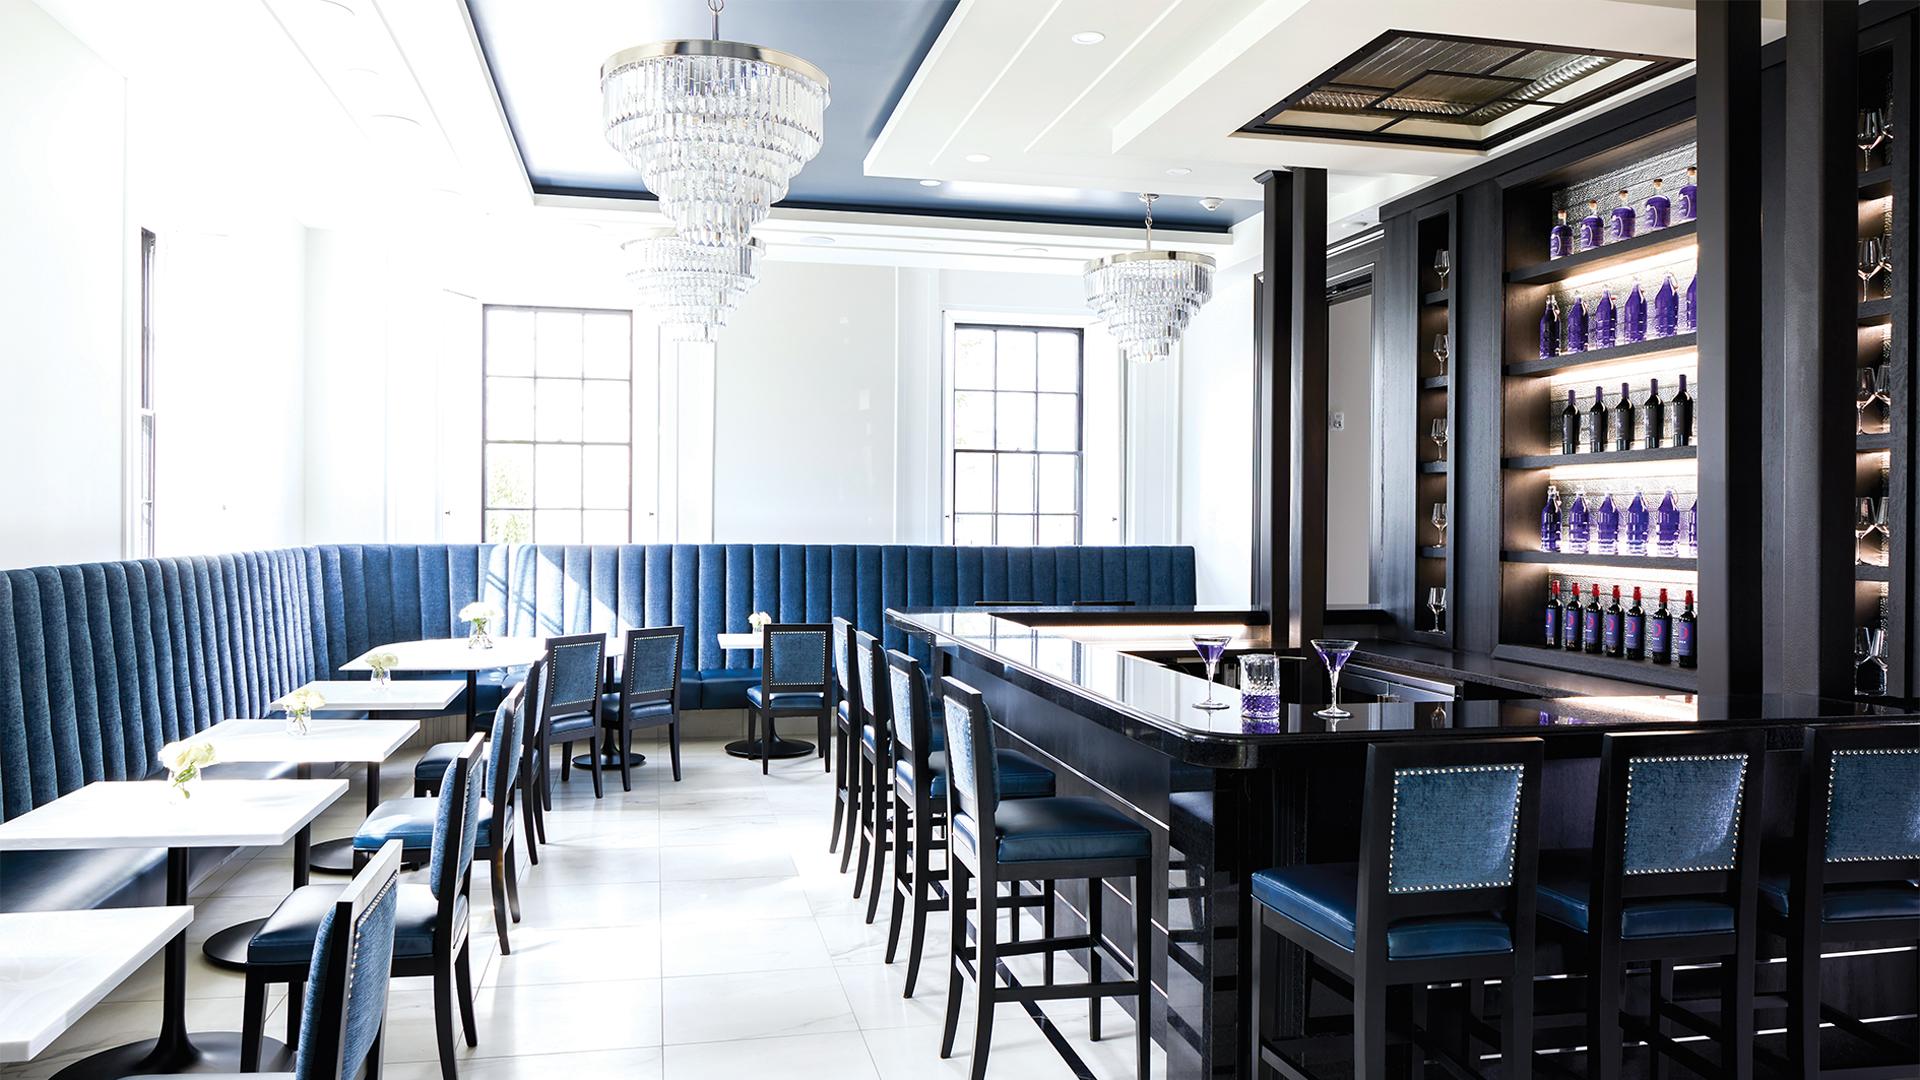 Ontario's best boutique hotels | The Bank Gastrobar at The Frontenac Club in Kingston